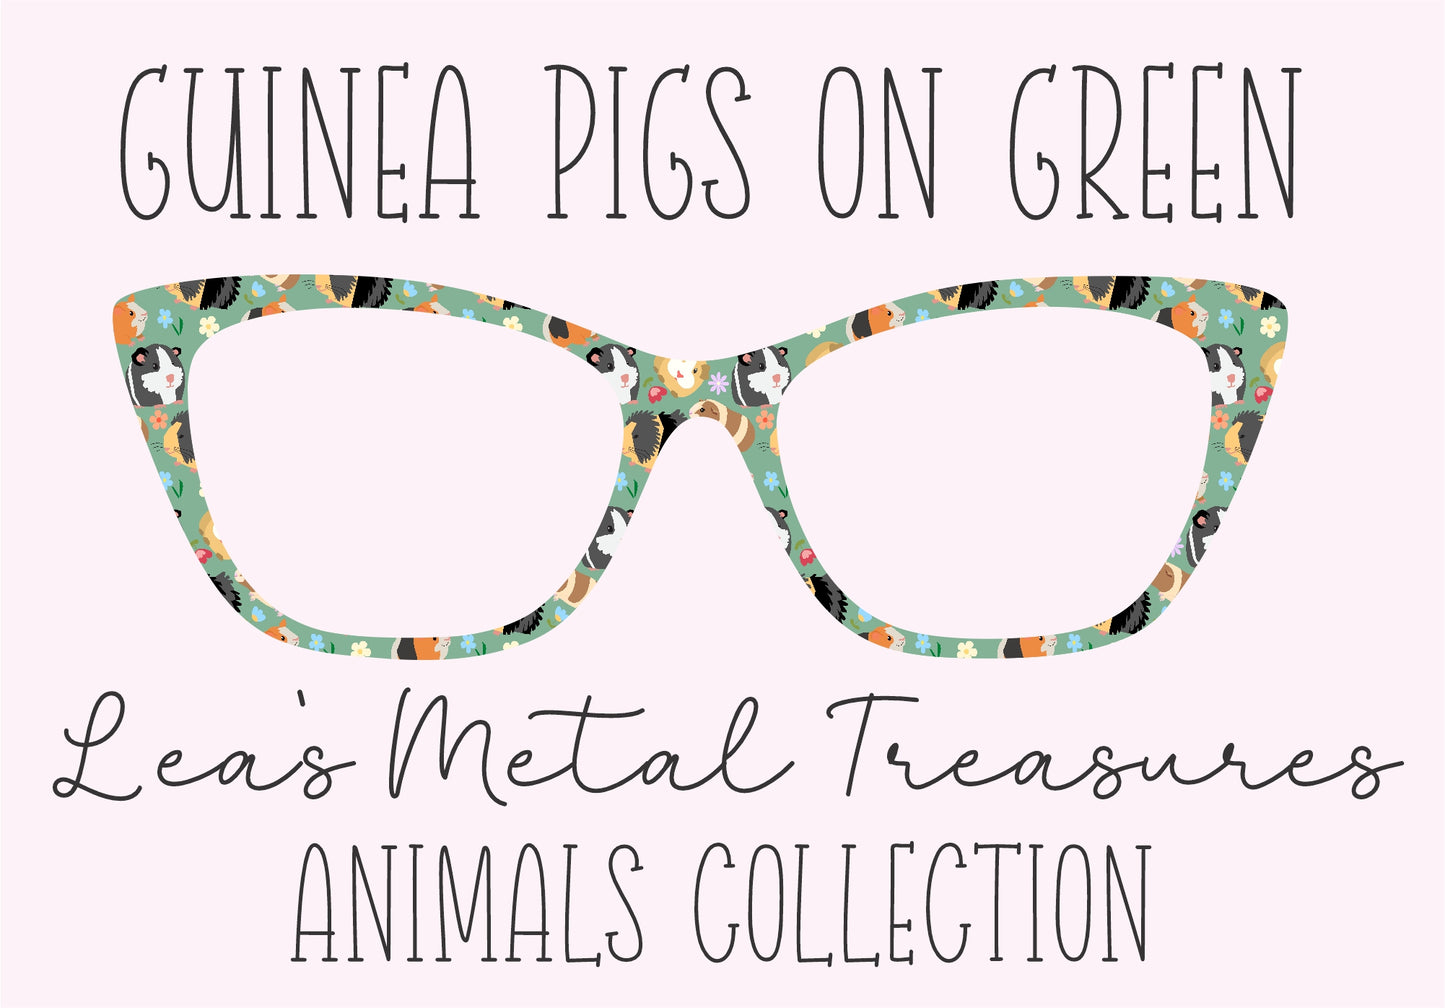 GUINEA PIGS ON GREEN Eyewear Frame Toppers COMES WITH MAGNETS